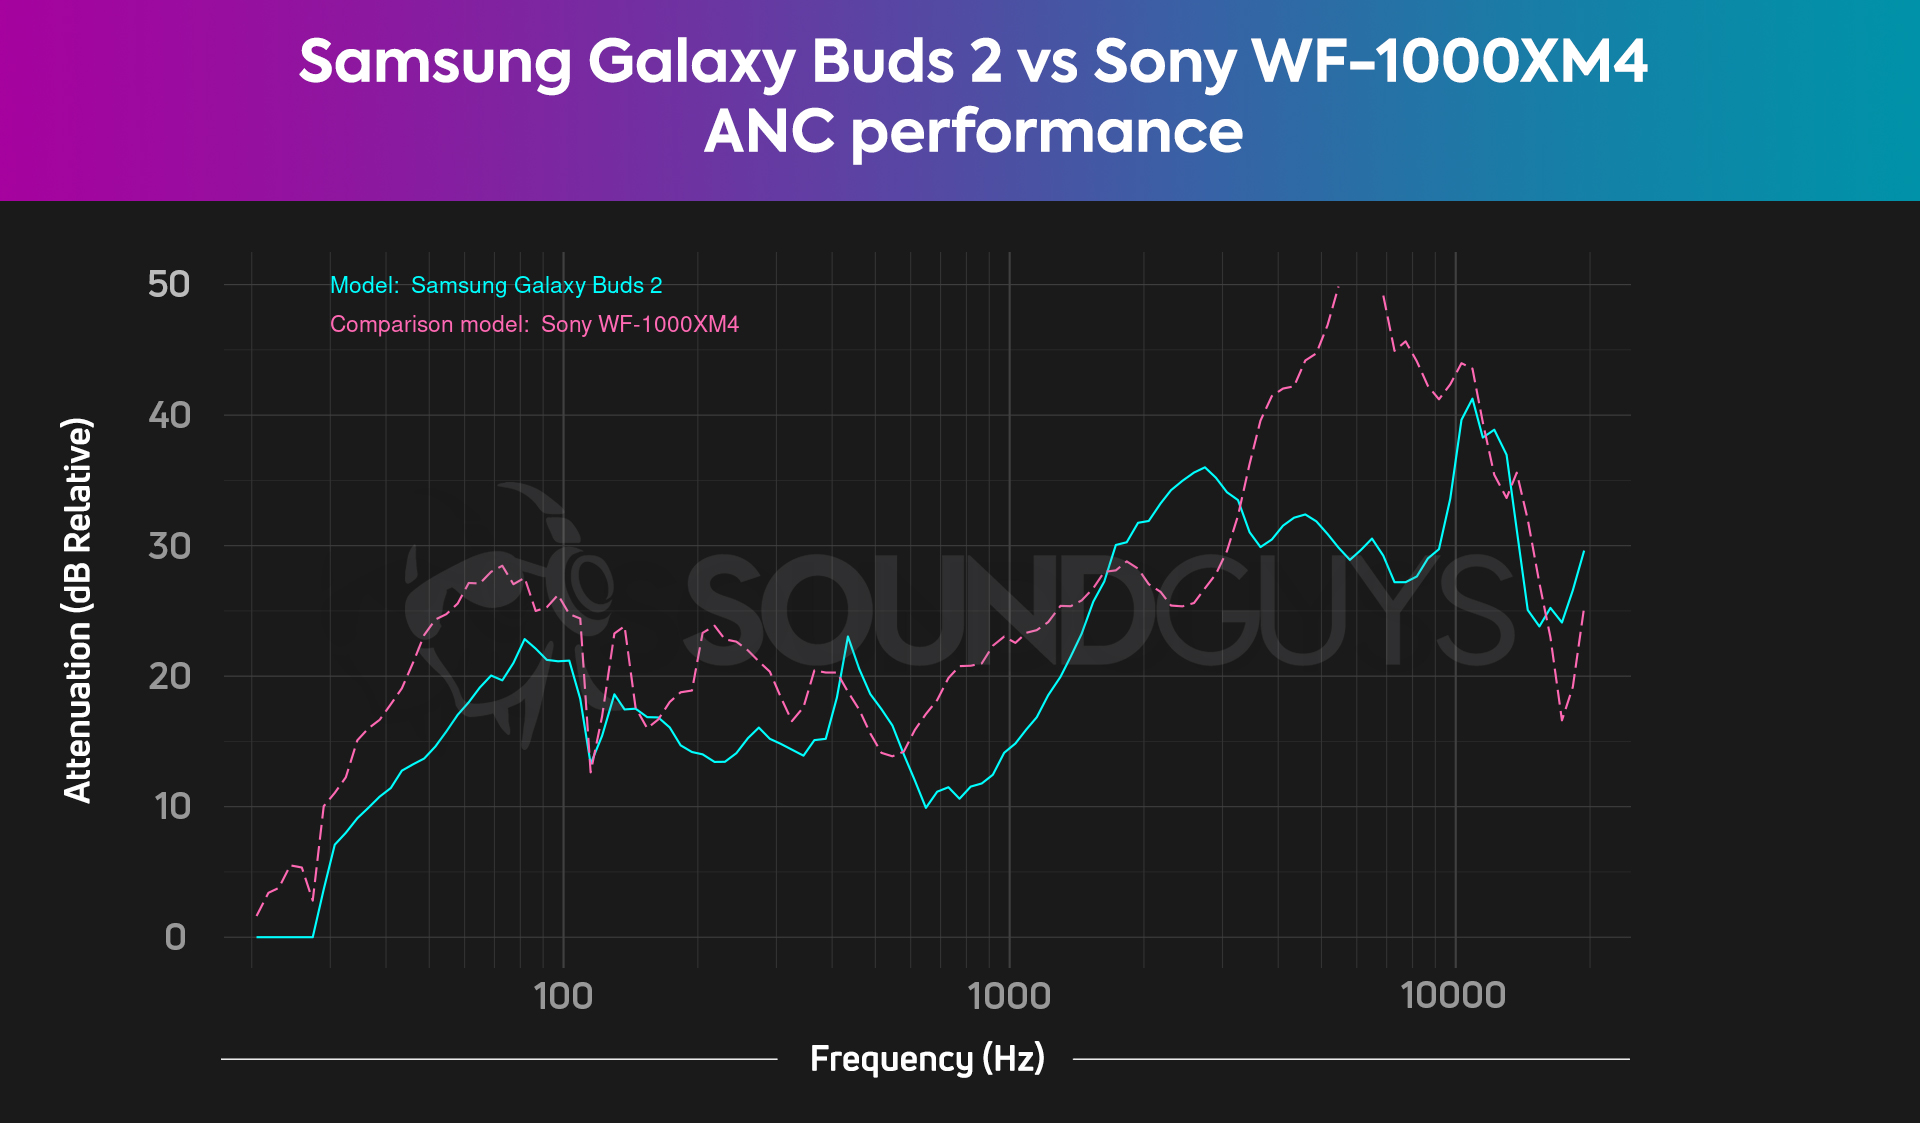 A chart compares the Samsung Galaxy Buds 2 and Sony WF-1000XM4 noise canceling, showing the Sony earbuds have much better ANC.